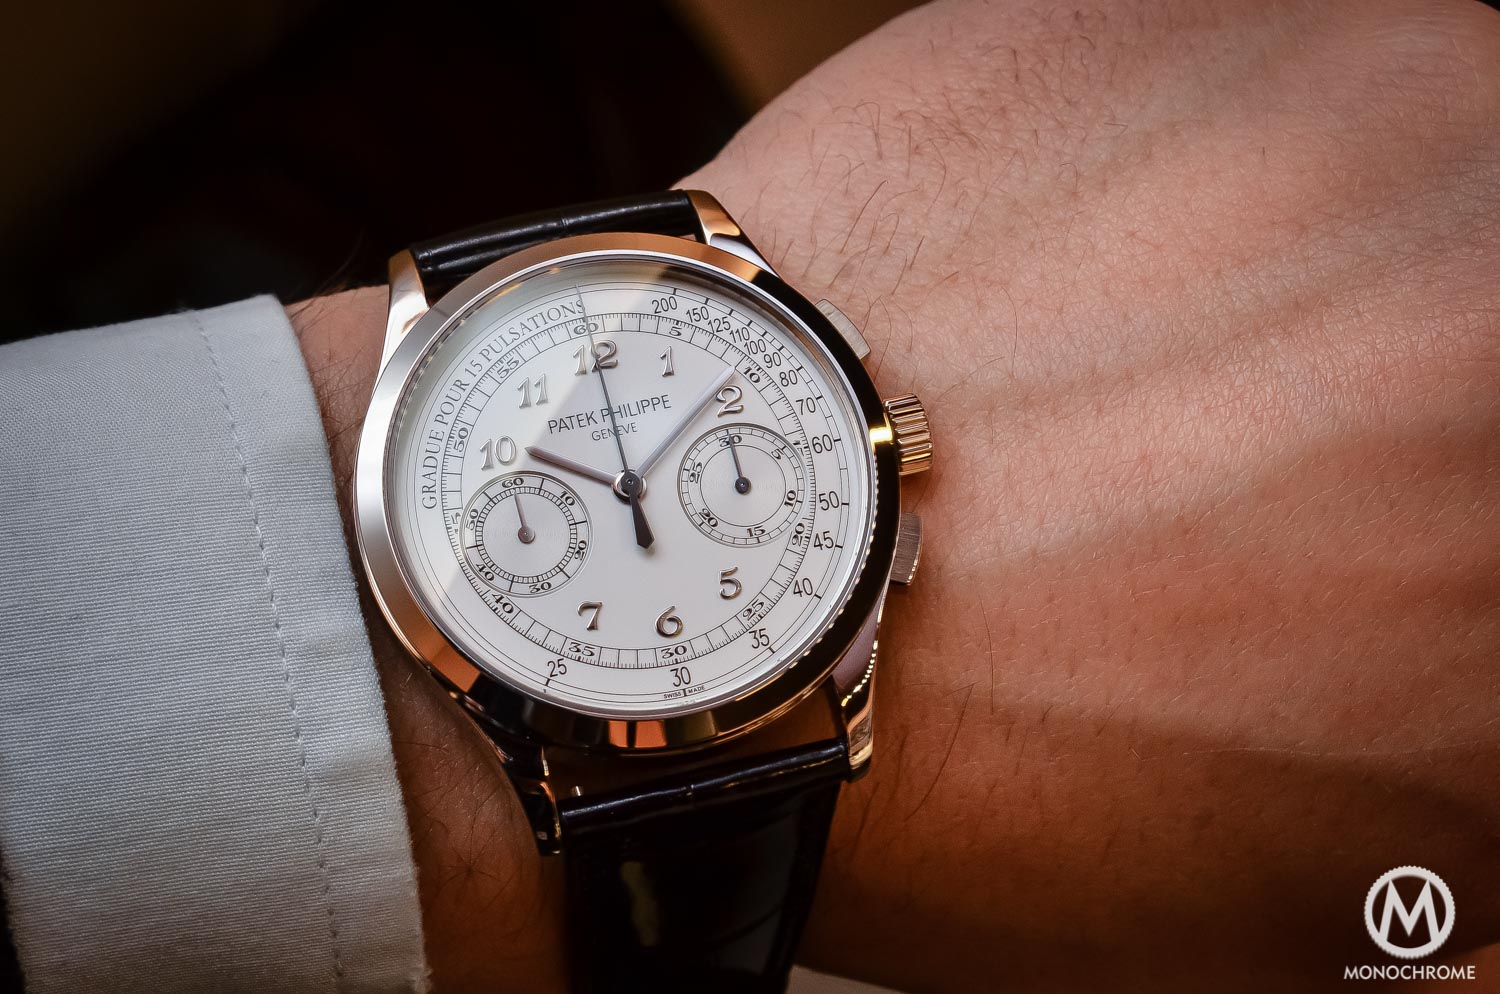 Patek Philippe 5170g-001 Chronograph - review - on the wrist